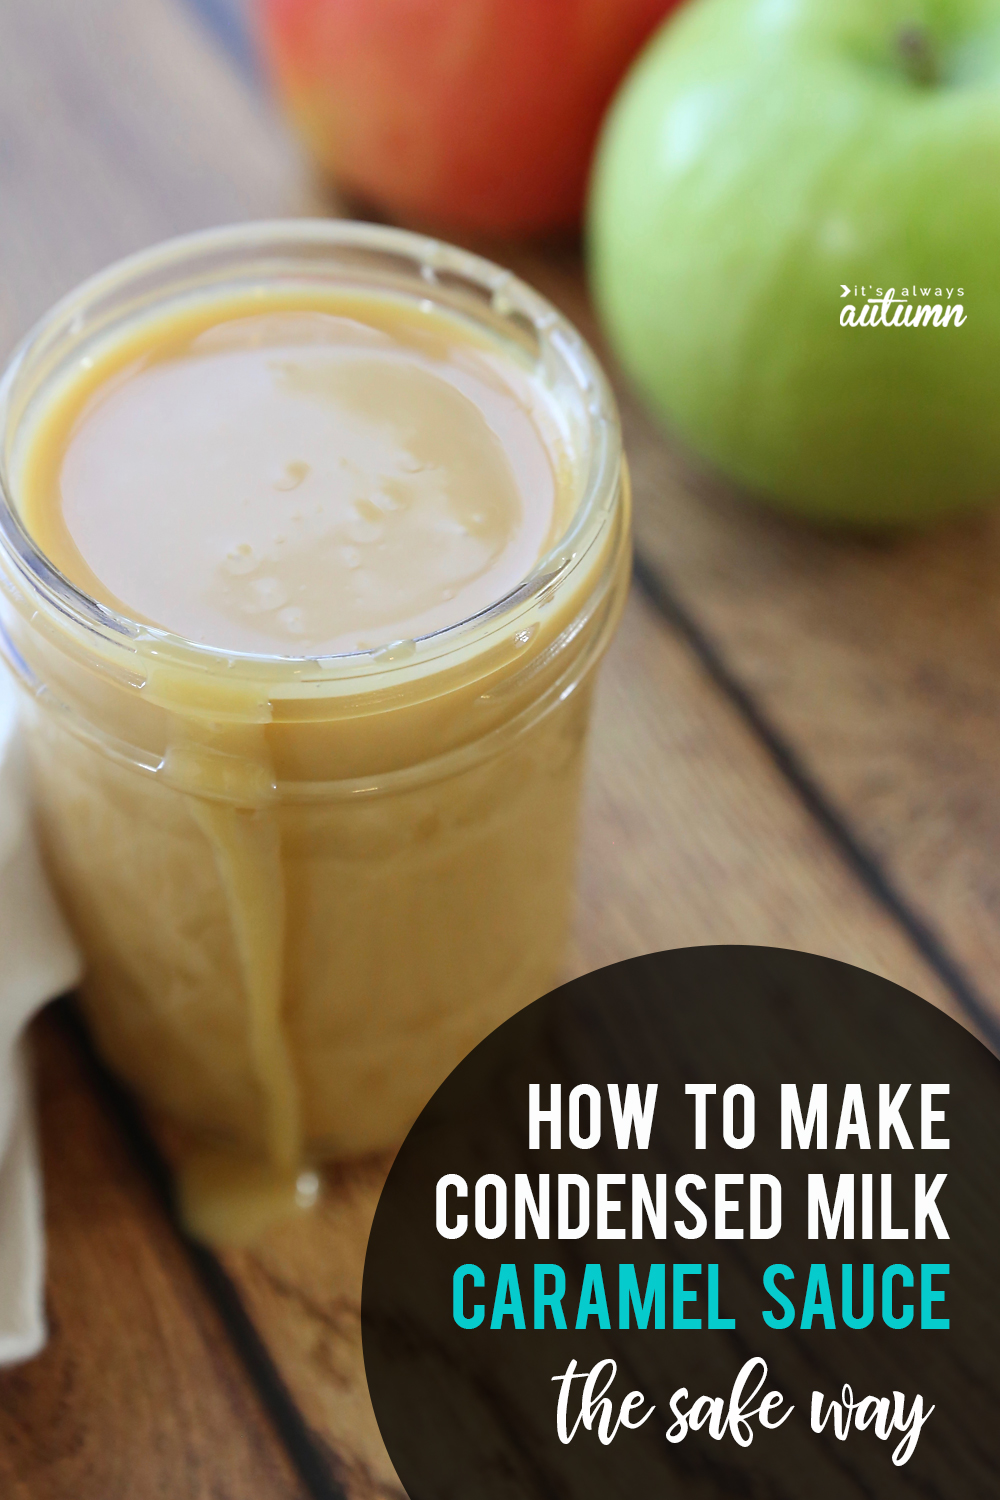 Learn how to make sweetened condensed milk caramel the SAFE and easy way.